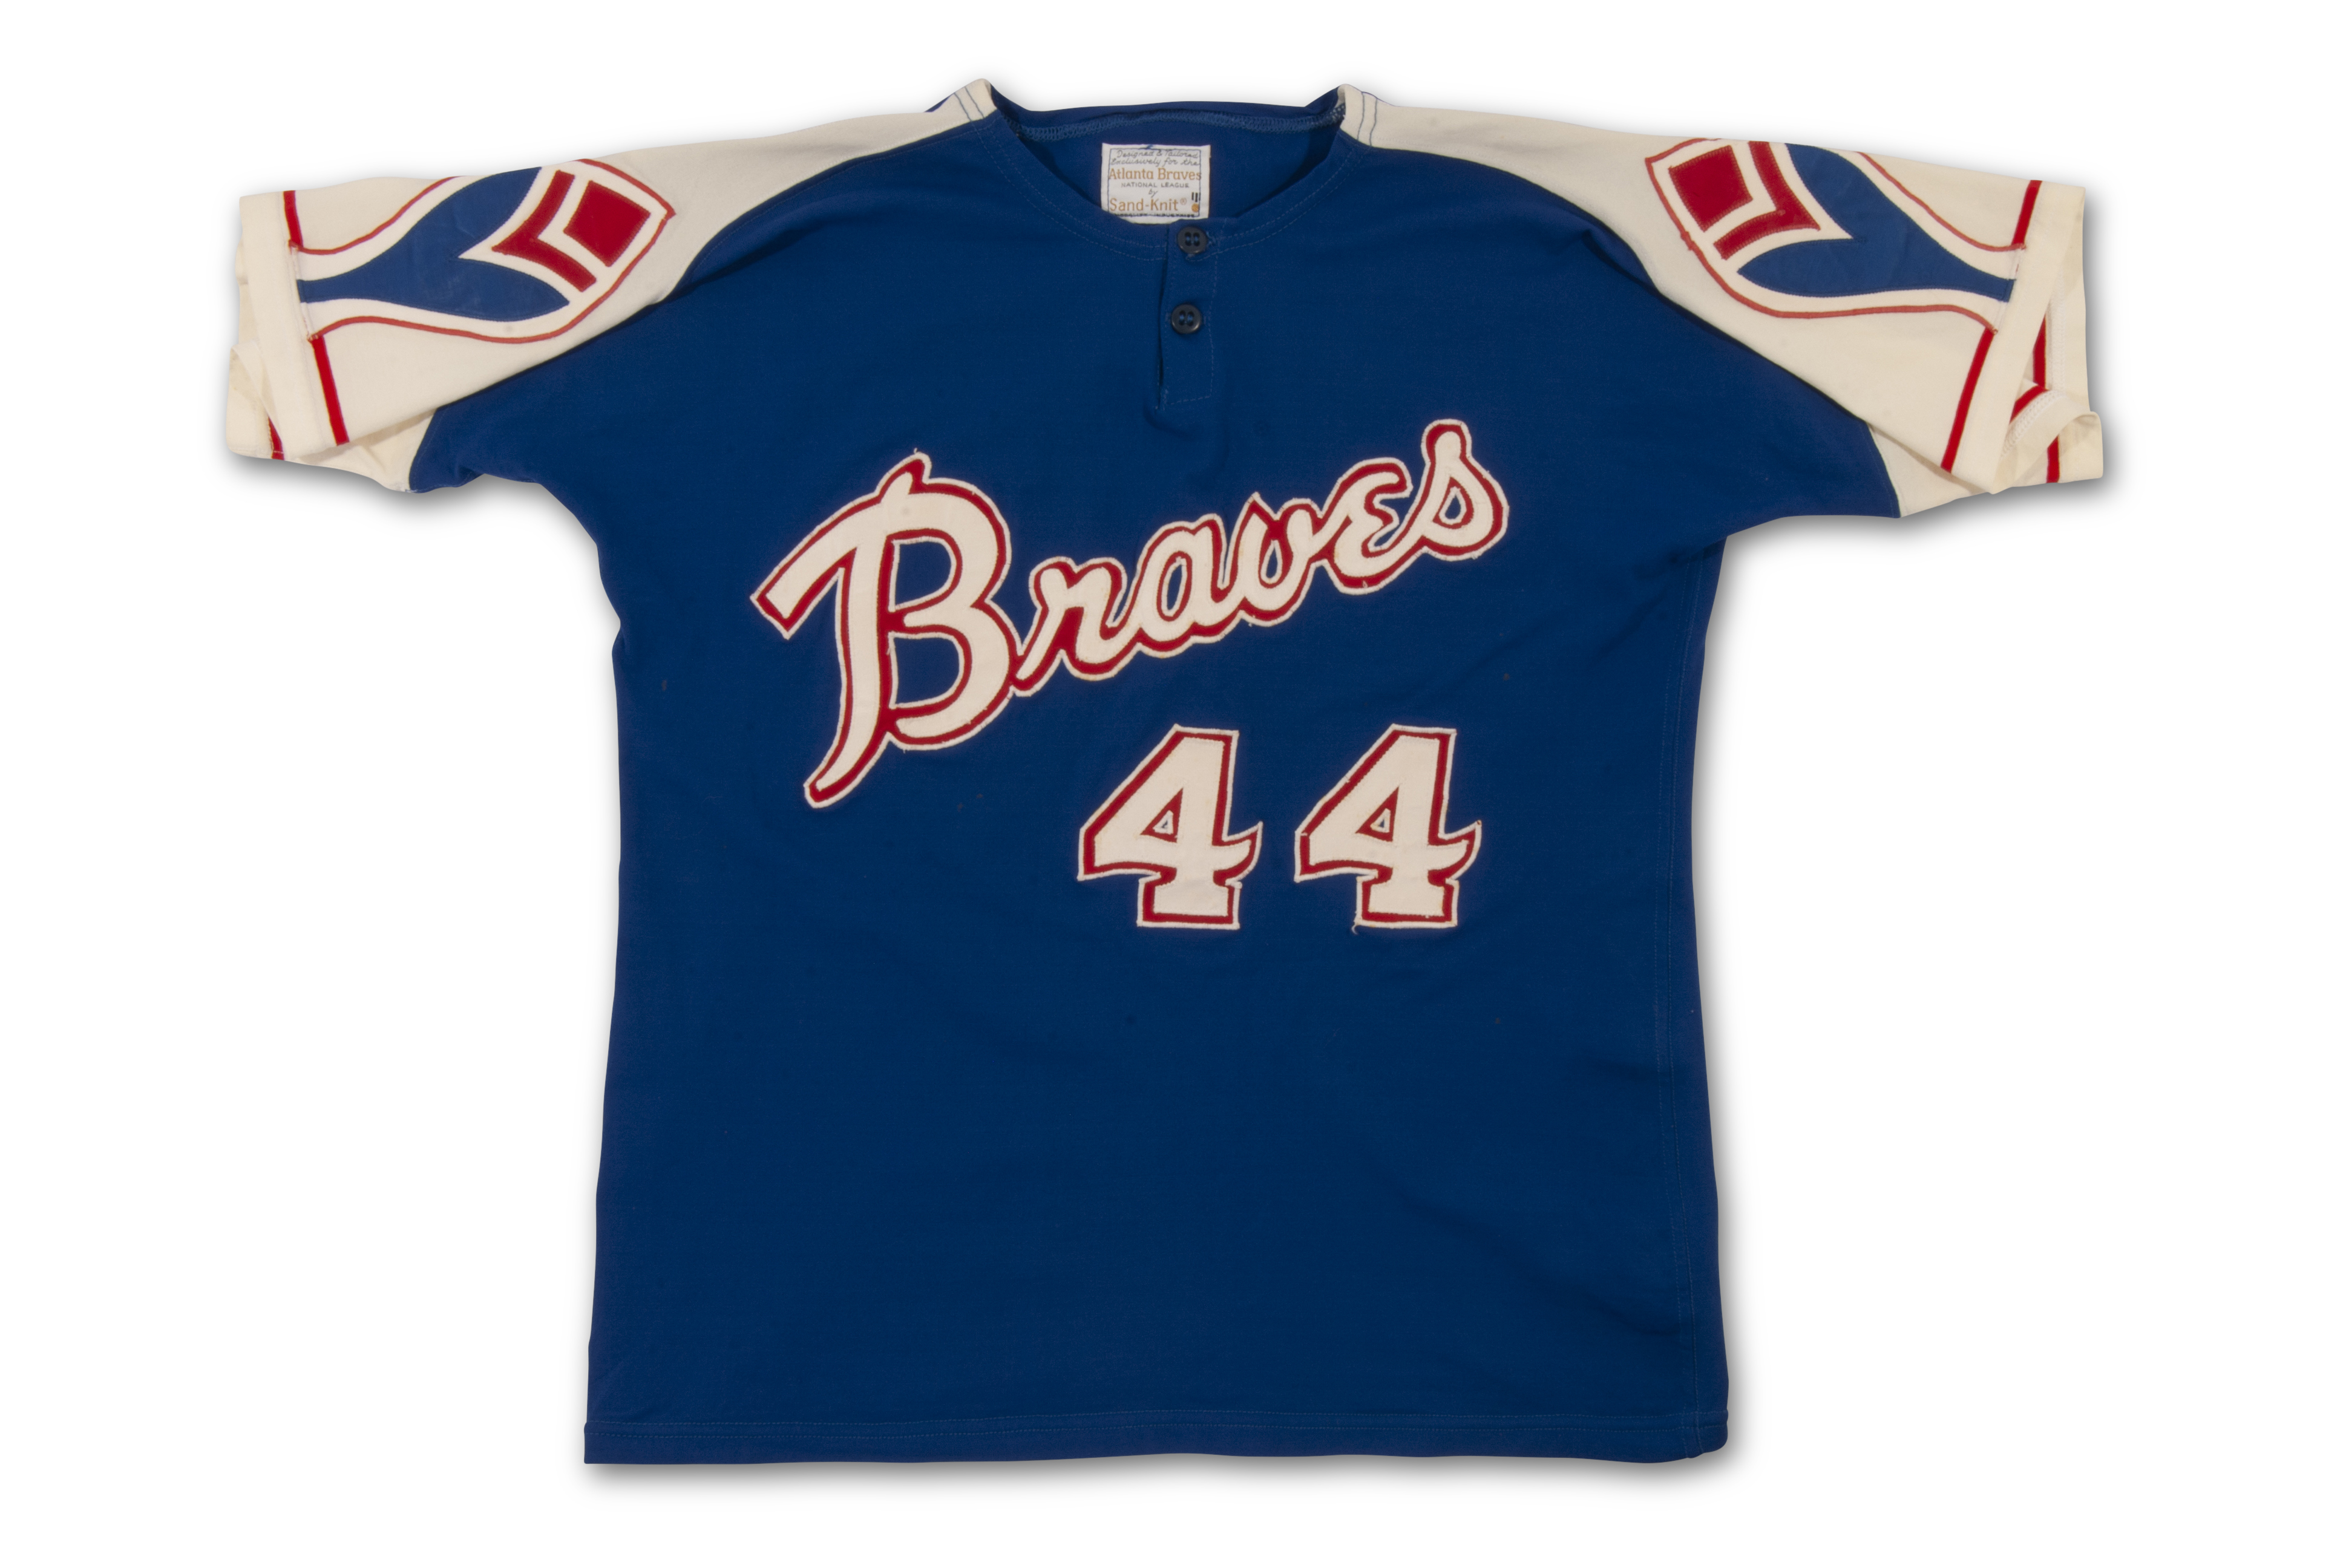 Atlanta Braves Jersey Logo (1972) - A blue and red feather